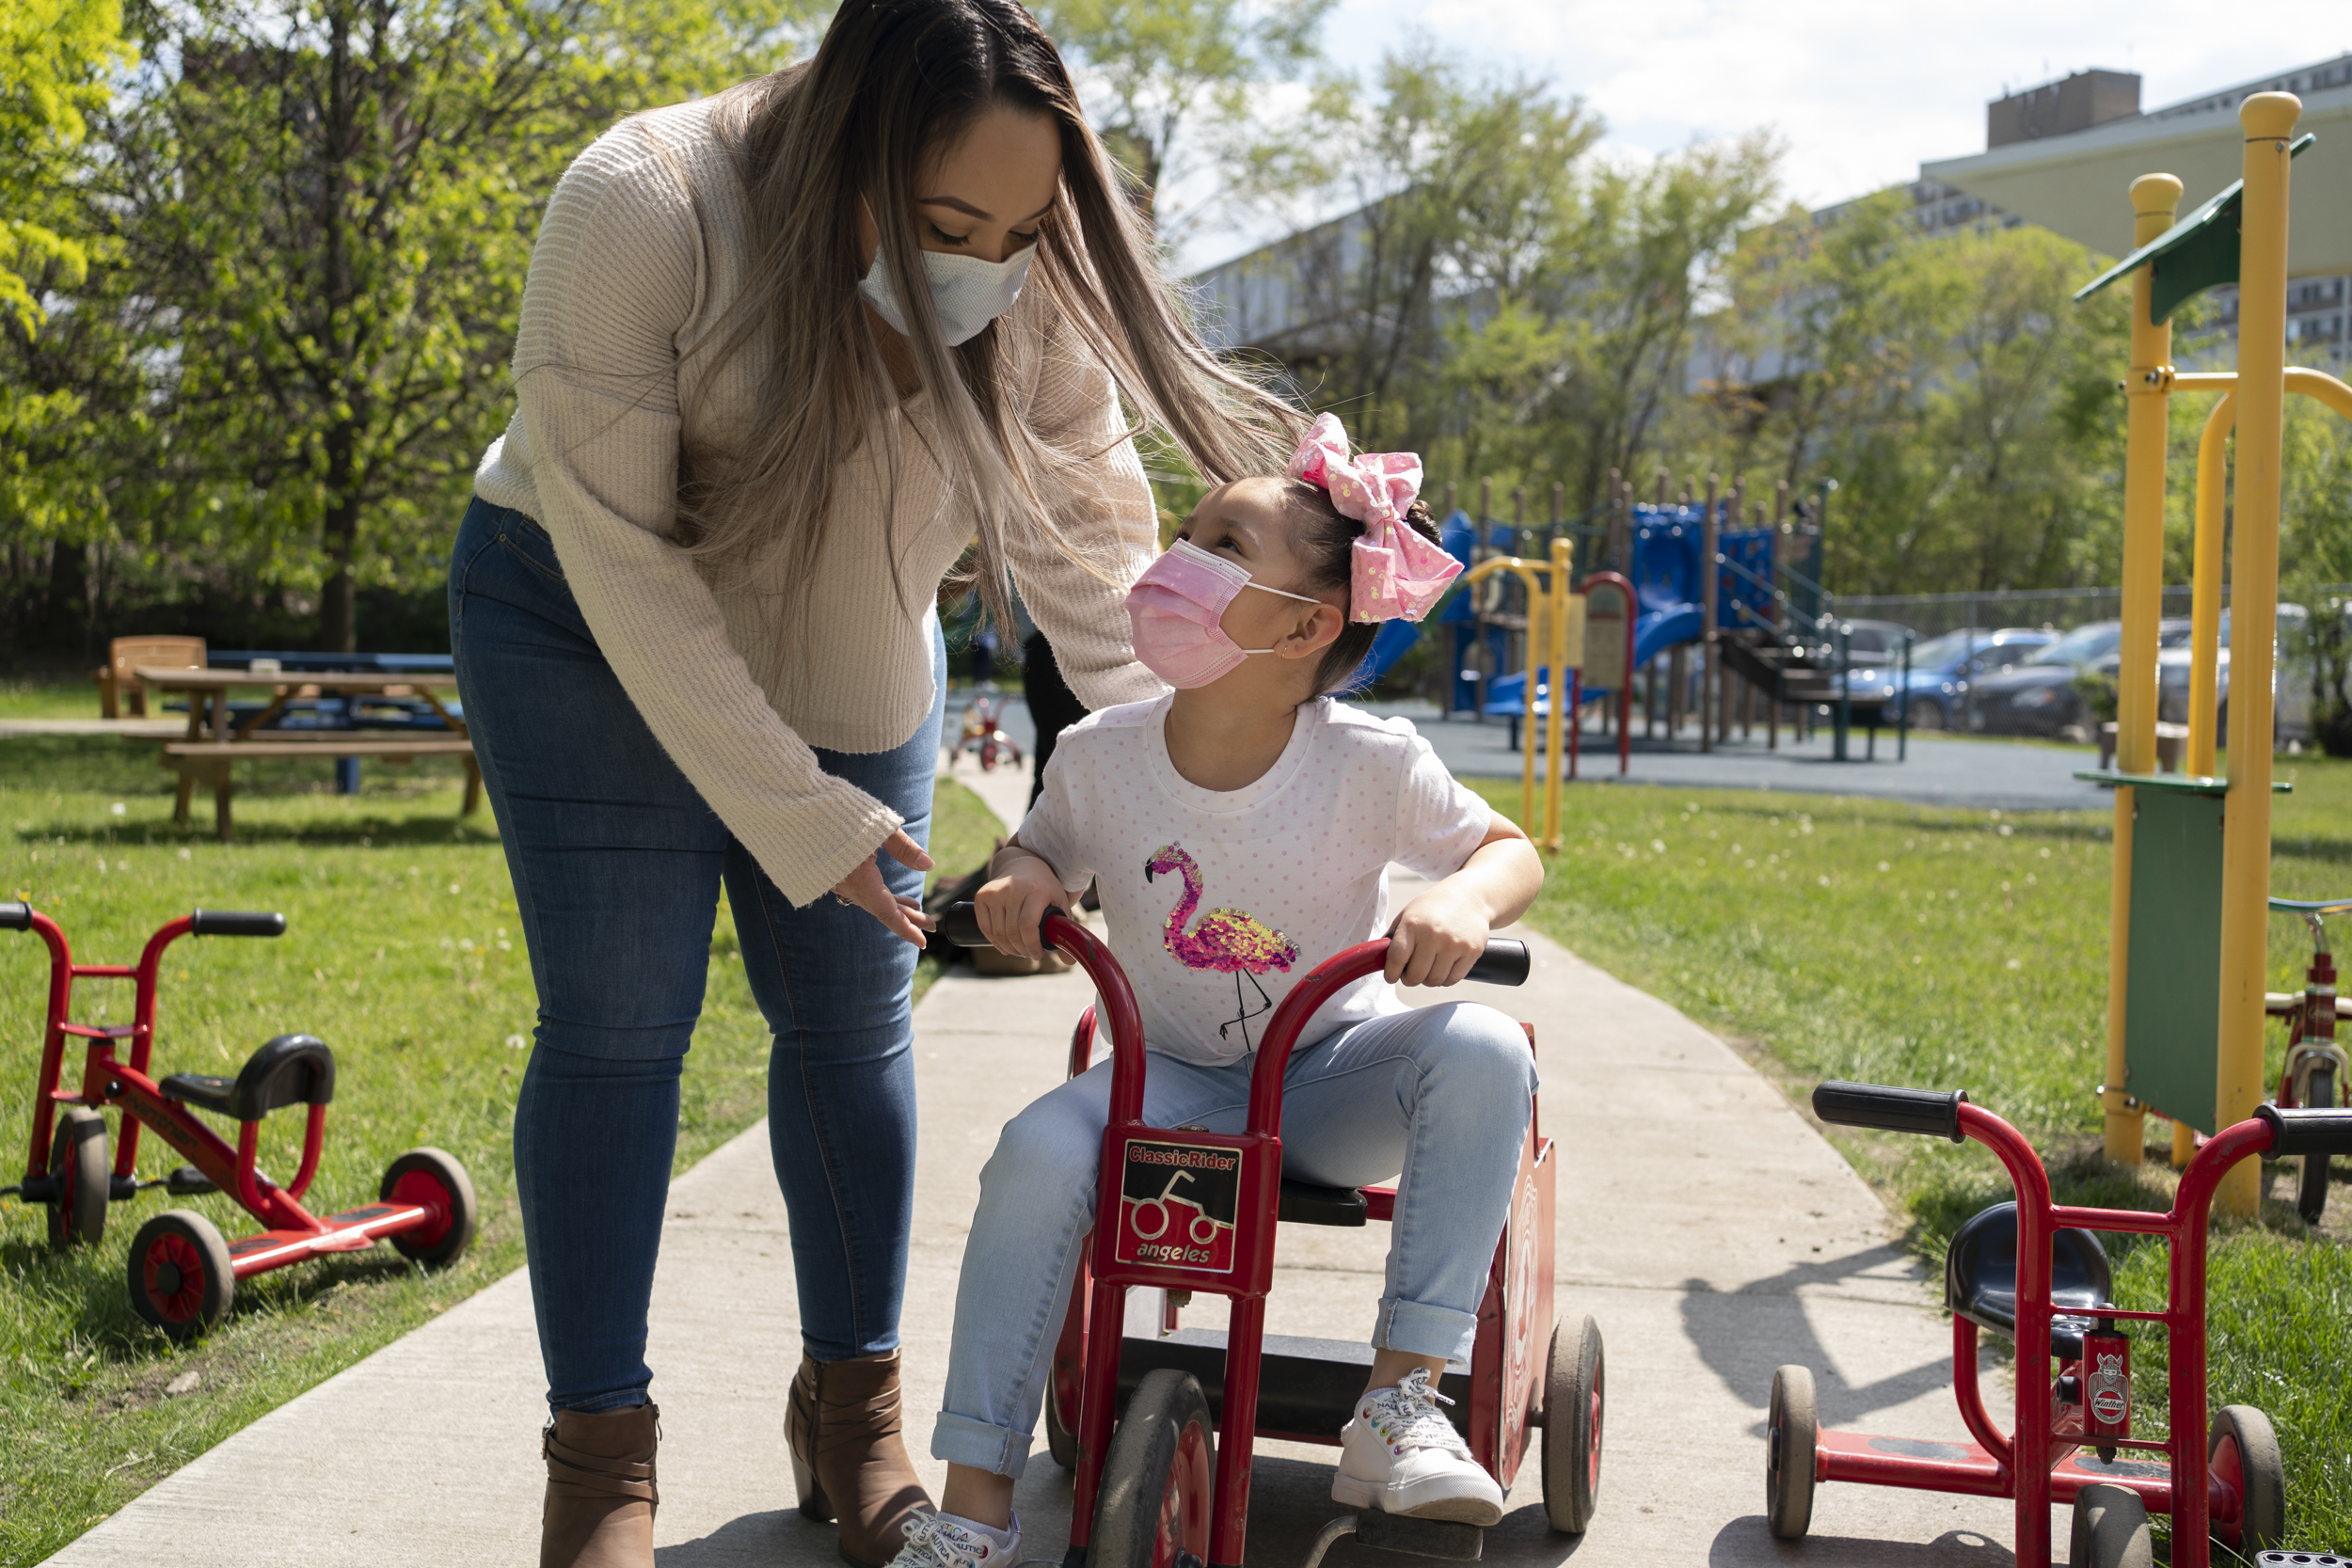 A mother wearing jeans, tan shirt and protective mask pushes her daughter on a red tricycle. The daughter is wearing a white flamingo shirt, pink mask, pink bow and jeans.